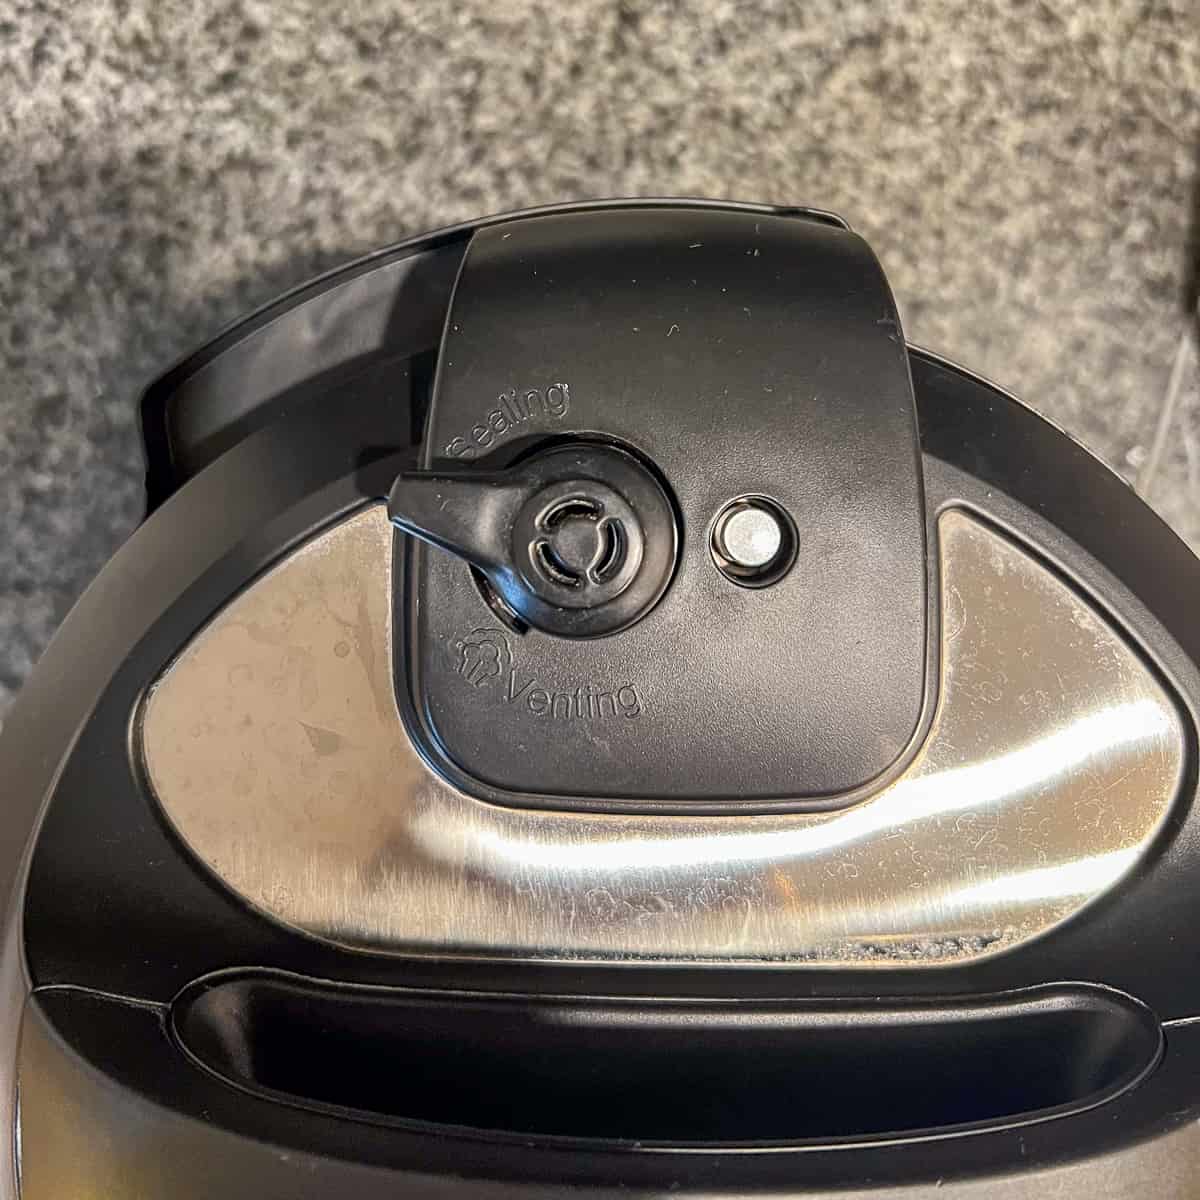 top view of the Instant Pot lid with the valve in the "Sealing" position